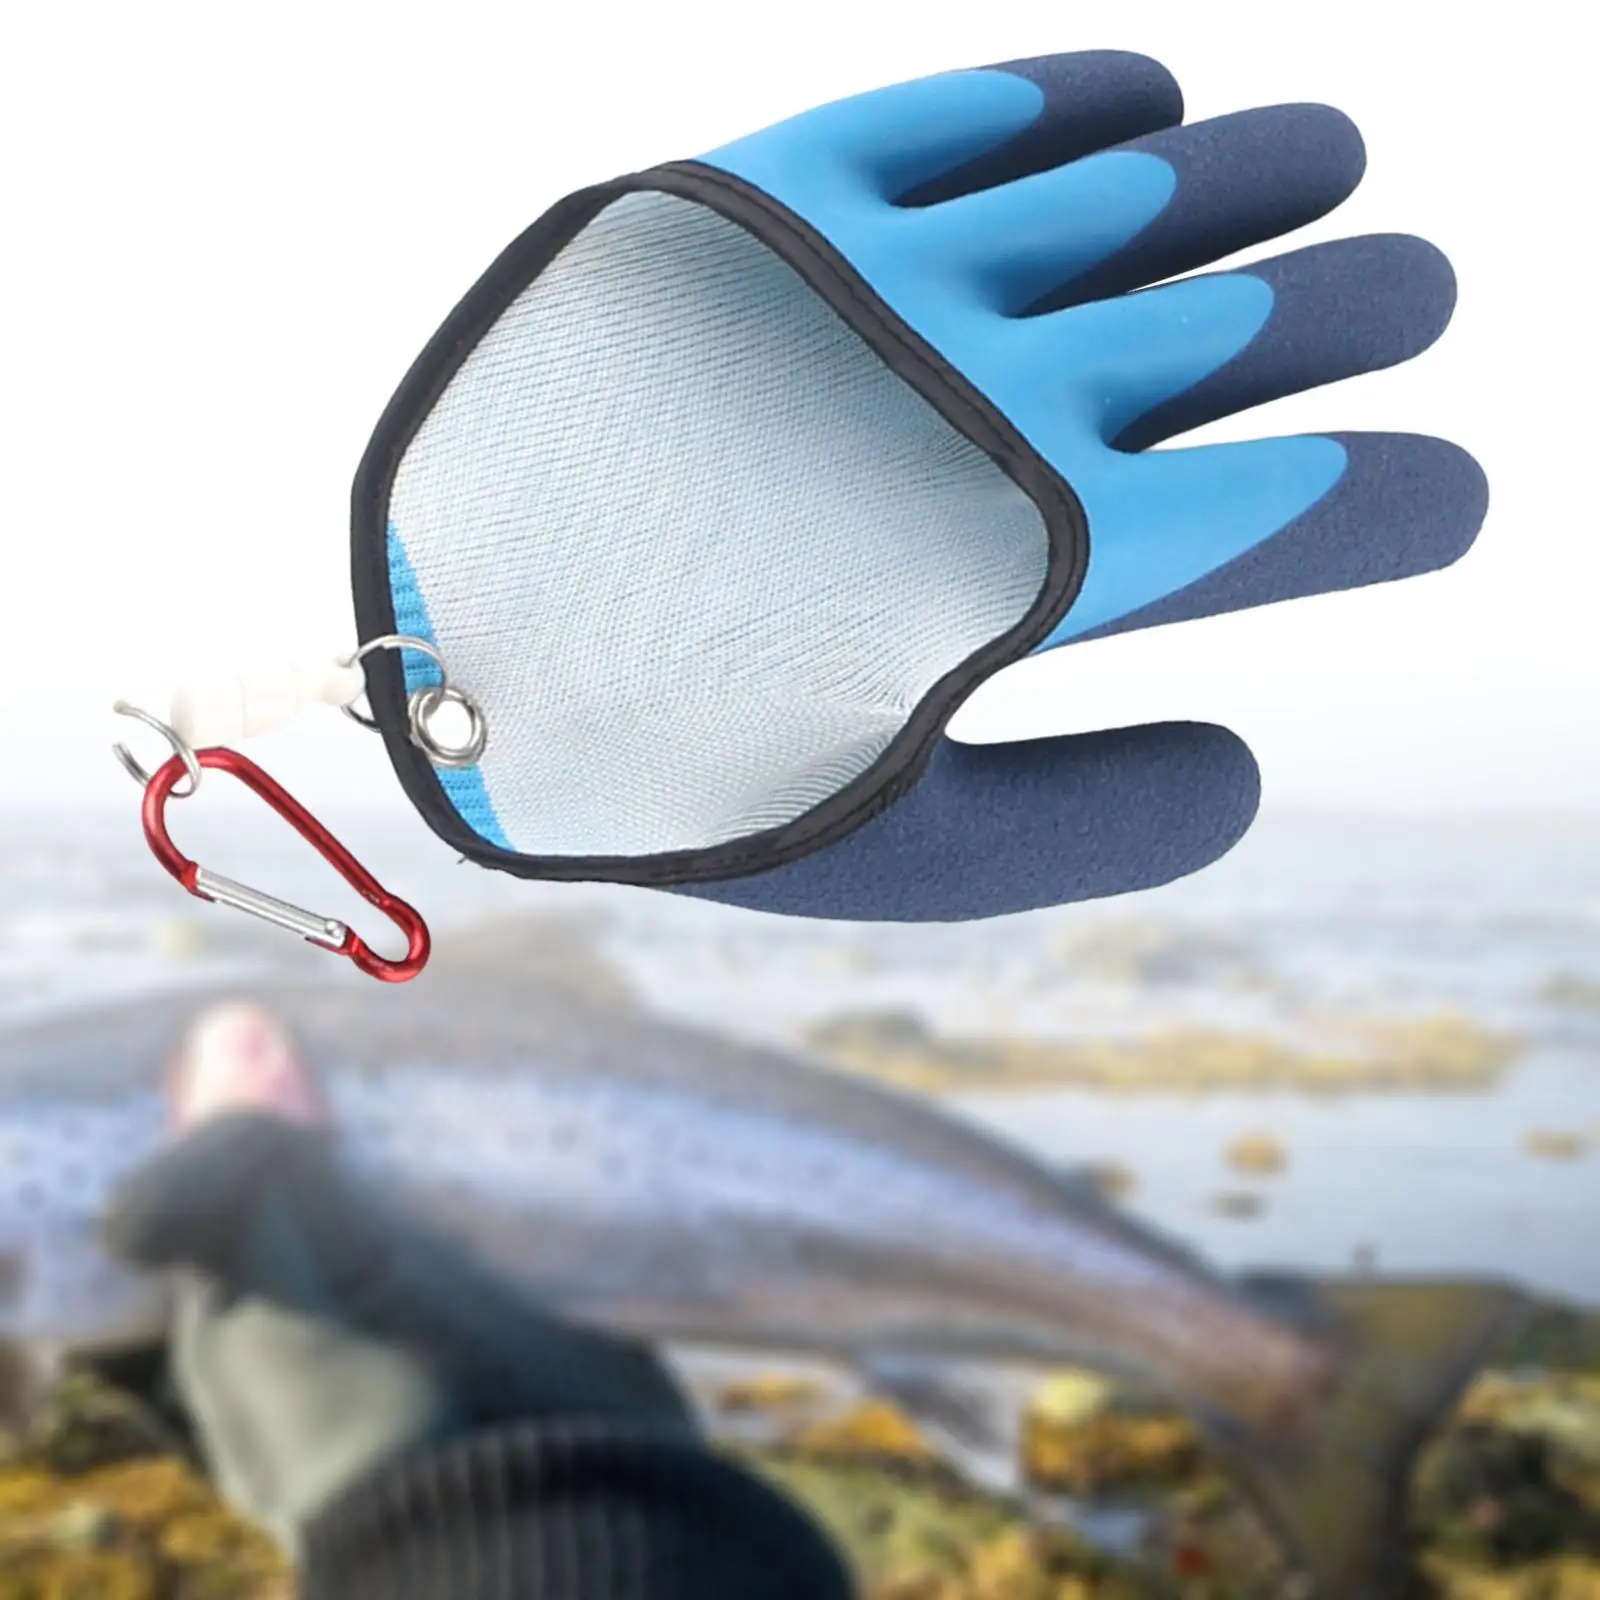 Flexible Fish Left Hand Puncture Proof Supplies Anti Skid Grab Weather Winter Hunting Hand Ice Fishing